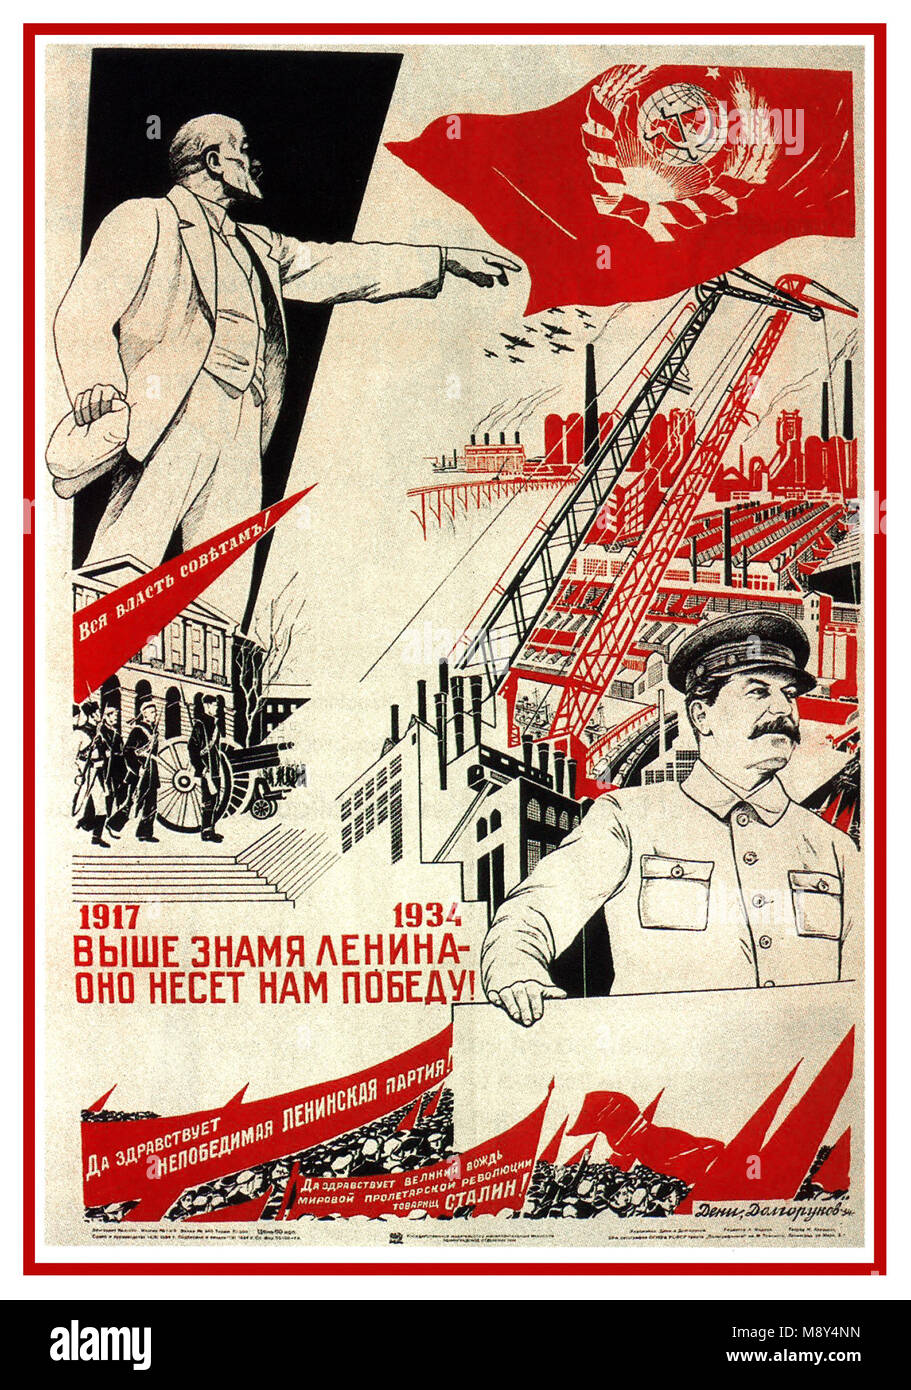 Soviet Russia Vintage 1930's propaganda poster in the Soviet Russia USSR The slogan and title of the poster: 1917-1934. Behind is Lenin pointing, “Stalin leads us to victory ' Stalin, supreme guide, presented as worthy heir to Lenin. Behind Stalin his work: factories, cranes, dams ... symbolizing the Soviet industry developed by Stalin with the five-year plans from 1928 Stock Photo